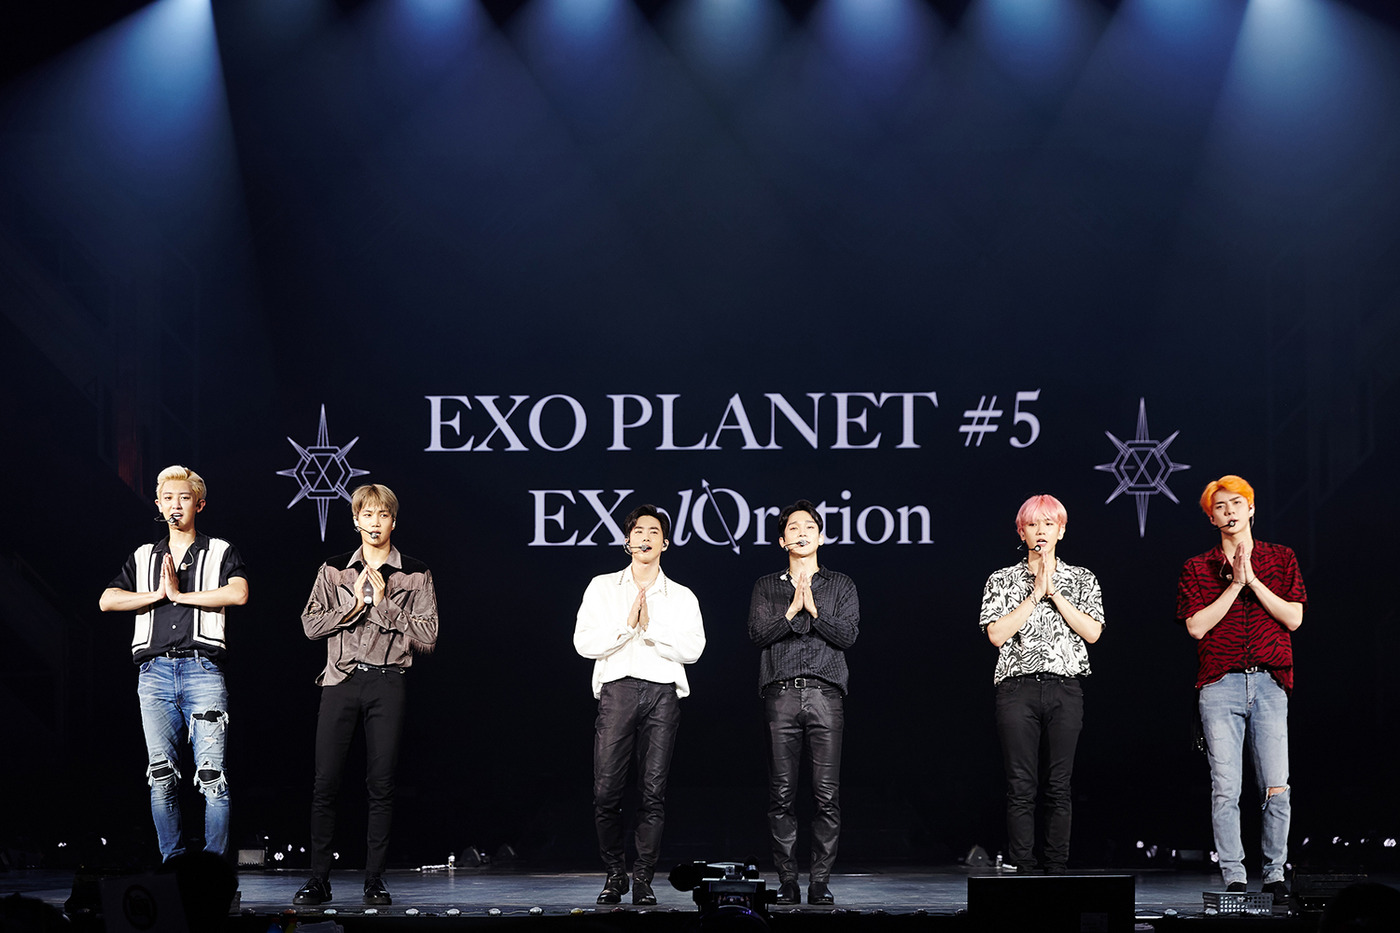 EXO said on the official Twitter on the 24th, I am going to Adjust the schedule of EXO 6th album, which was scheduled to be sad, and I would like to ask your understanding that you would have waited a lot since you are going to announce the schedule again.I express my deepest condolences and pray for the goodwill of the deceased.EXO plans to announce its 6th album on the 27th, and plans to release teaser videos sequentially before that.Earlier, Seoul Gangnam Police Station said that Goo Hara was found dead in a residence in Cheongdam-dong, Seoul, South Korea.After the Vivo was known, Goo Hara officials said, I have been so sad and sad news, he said. I express my deepest condolences on the last road of the deceased.I am very anxious about the psychological shock and anxiety of the family and acquaintances of Goo Hara, he said. I would like to ask you to refrain from rumors and speculative reports, including media officials and fans.Goo Hara was in the process of signing a contract with Japan agency without a Korean agency, and the statement was delivered through Goo Haras manager.Goo Hara was greatly loved in 2008 as a member of KARA.After the recruitment of Goo Hara, KARA became very popular with songs such as Rock Yu, Good Day, Pretty Girl, Honey, Mr and Lupang, and Japan actively participated.In 2015, he debuted to Solo and announced Choco Chip Cookie, and later participated in a number of Drama OSTs.In addition to his singer activities, he also performed acting activities such as SBS City Hunter and showed charm in various entertainment programs.If you need help from experts due to difficult to talk about, such as depression, you can get 24-hour counseling at 1577-0199 suicide prevention hotline, 1393 suicide prevention counseling call, 129 call of hope, 1588-9191 call of life, and 1388 call of youth.